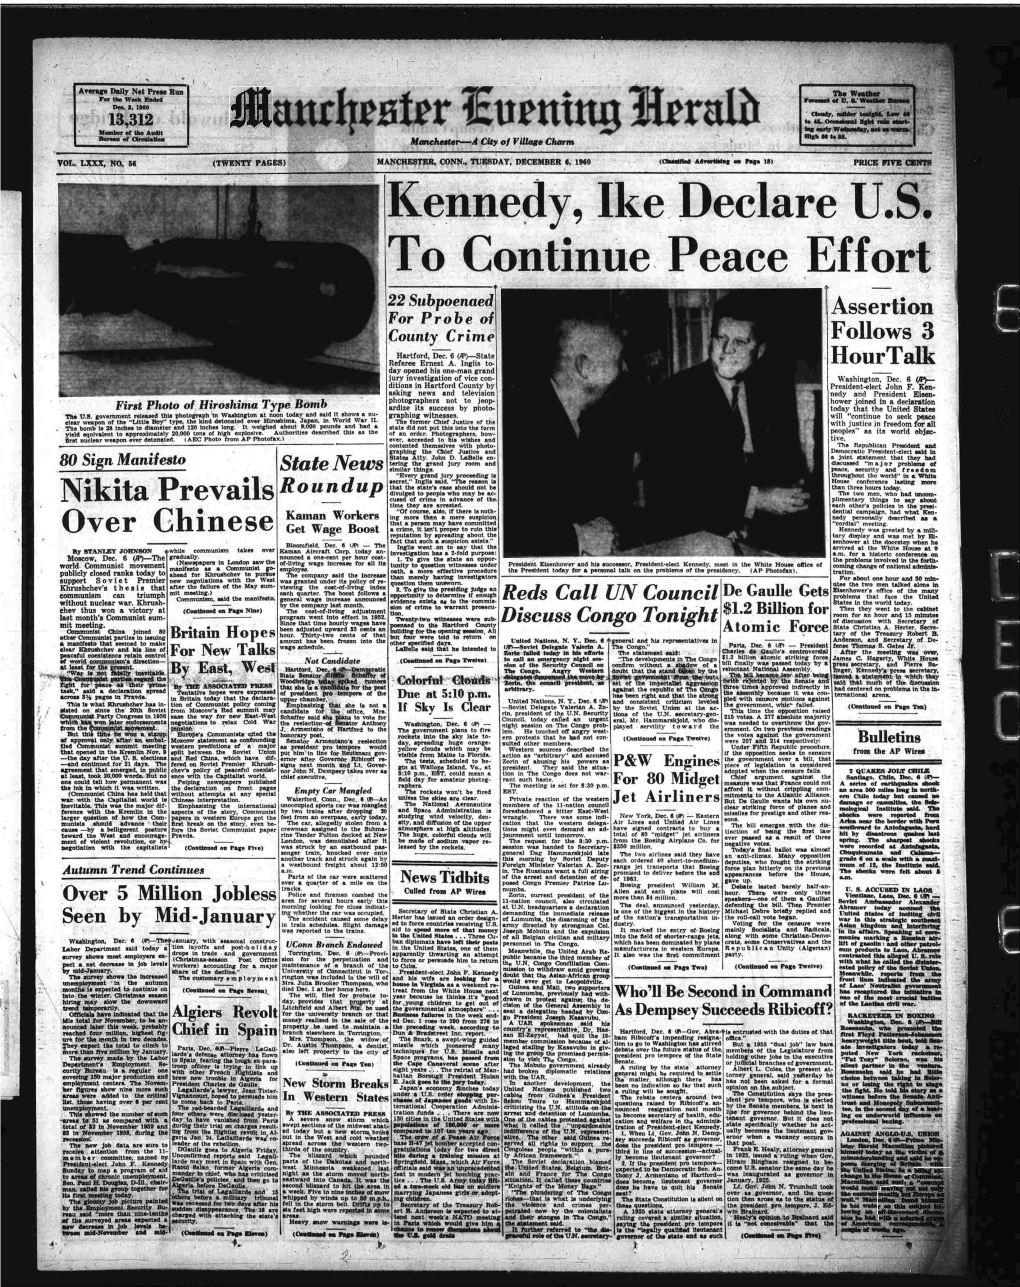 Kennedy, Ike Declare U.S. to Continue Peace Effort 22 Subpoenaed Assertion I R » ~ ' for Probe of County Crime Follows 3